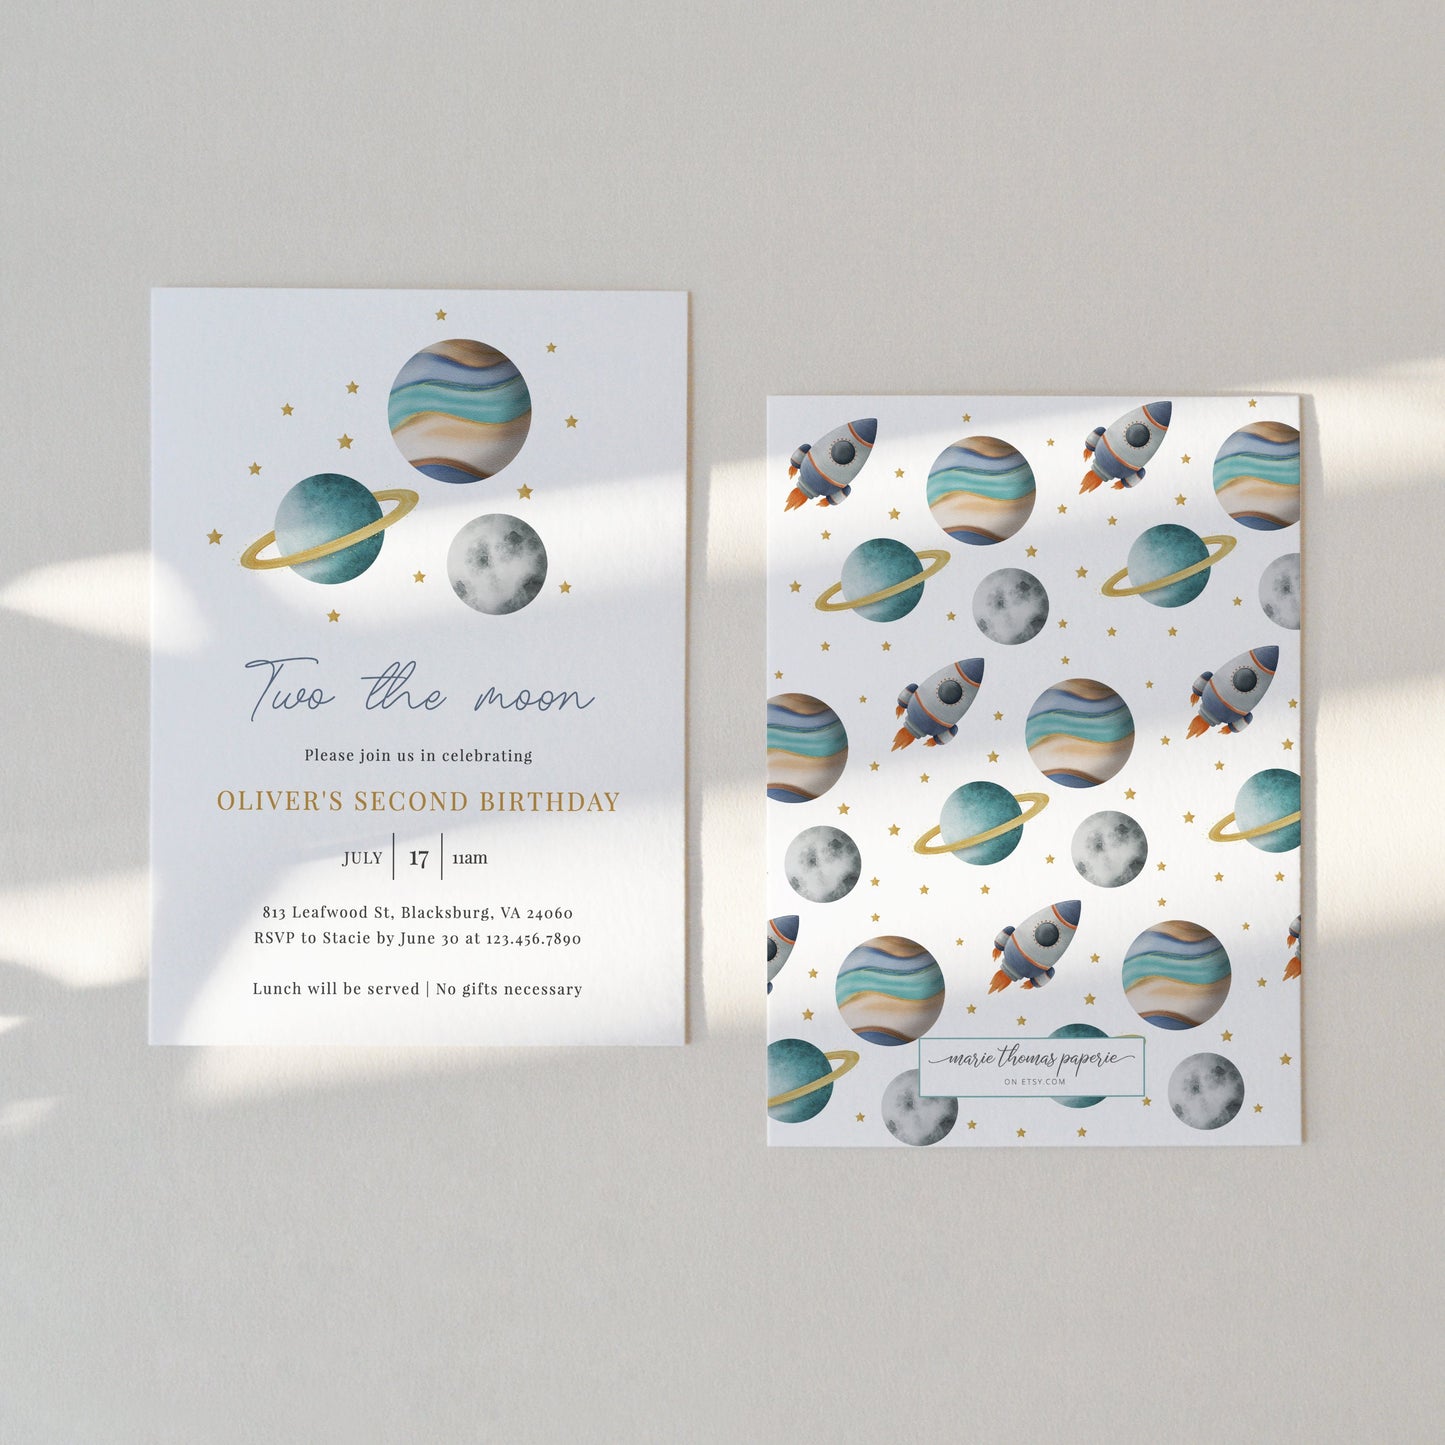 Editable   Outer Space Birthday Invitation Two the Moon Birthday Invite Planets Boy Second Birthday Template